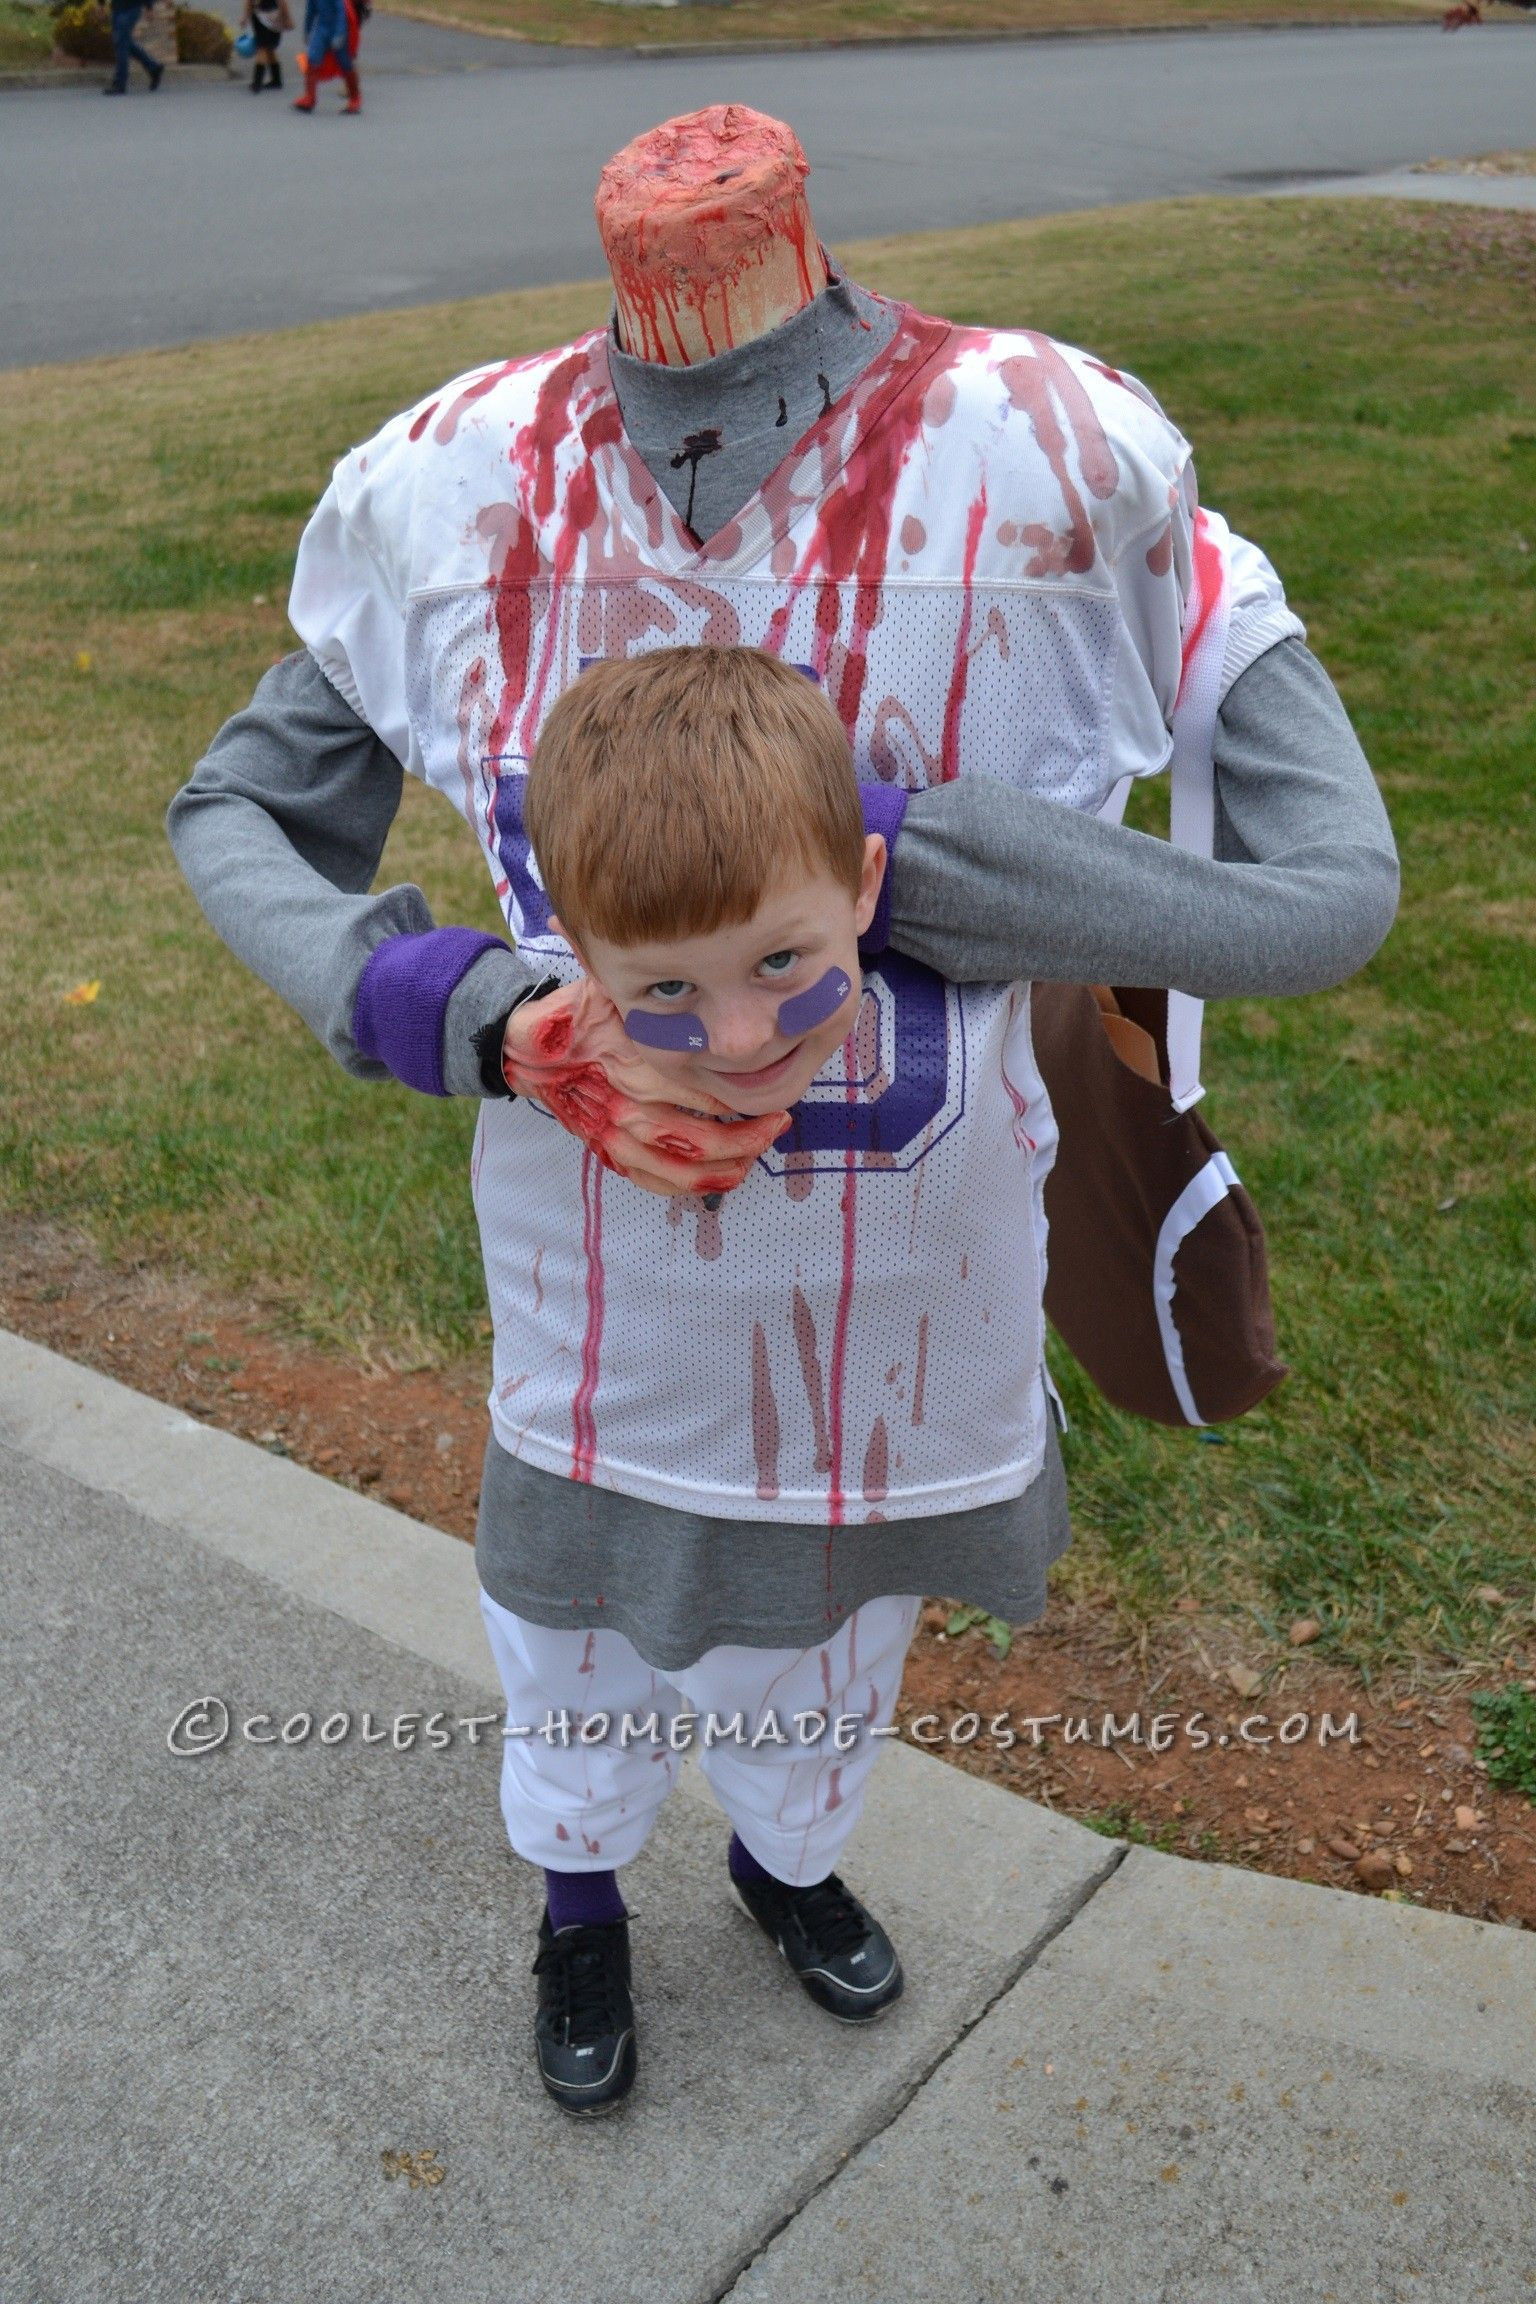 DIY Halloween Costumes For Kids
 Scary DIY Headless Football Player Halloween Costume in